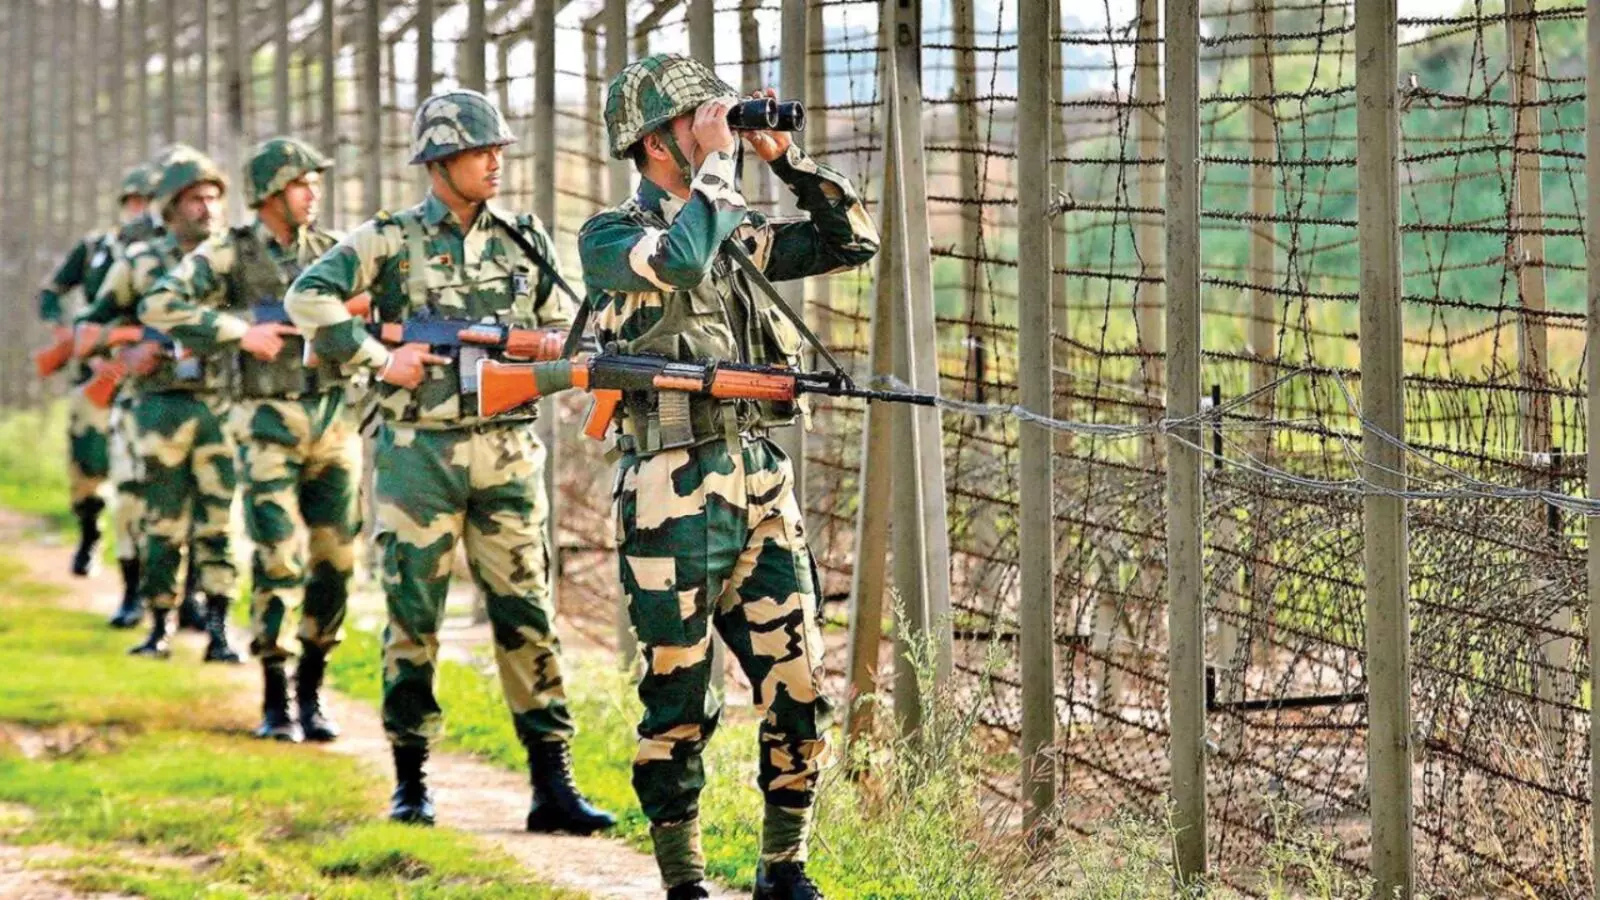 bsf recruitment 2022 know bsf vacancy detail education qualification selection process age limit